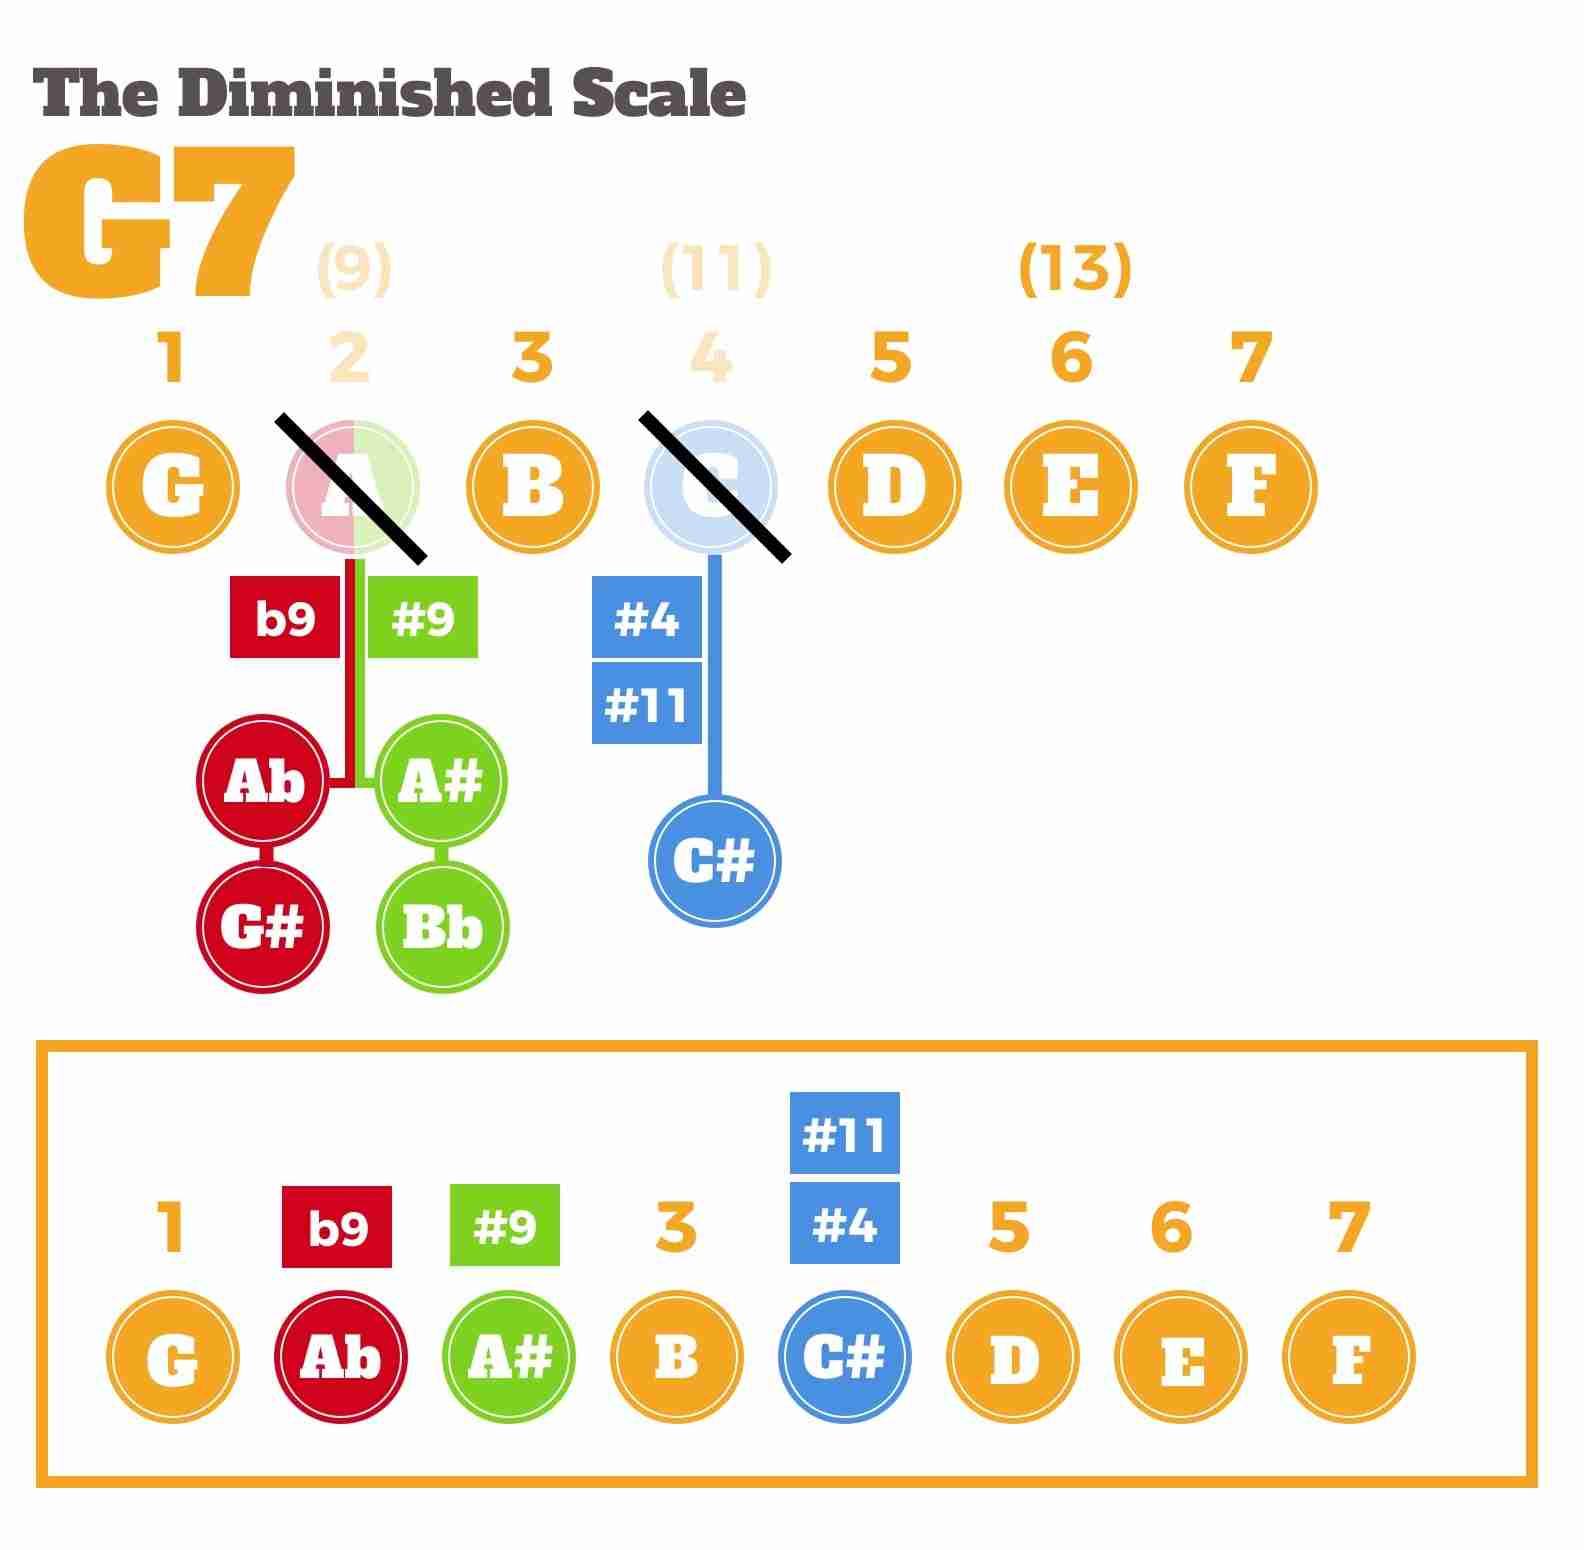 Diminshed scale on dominant